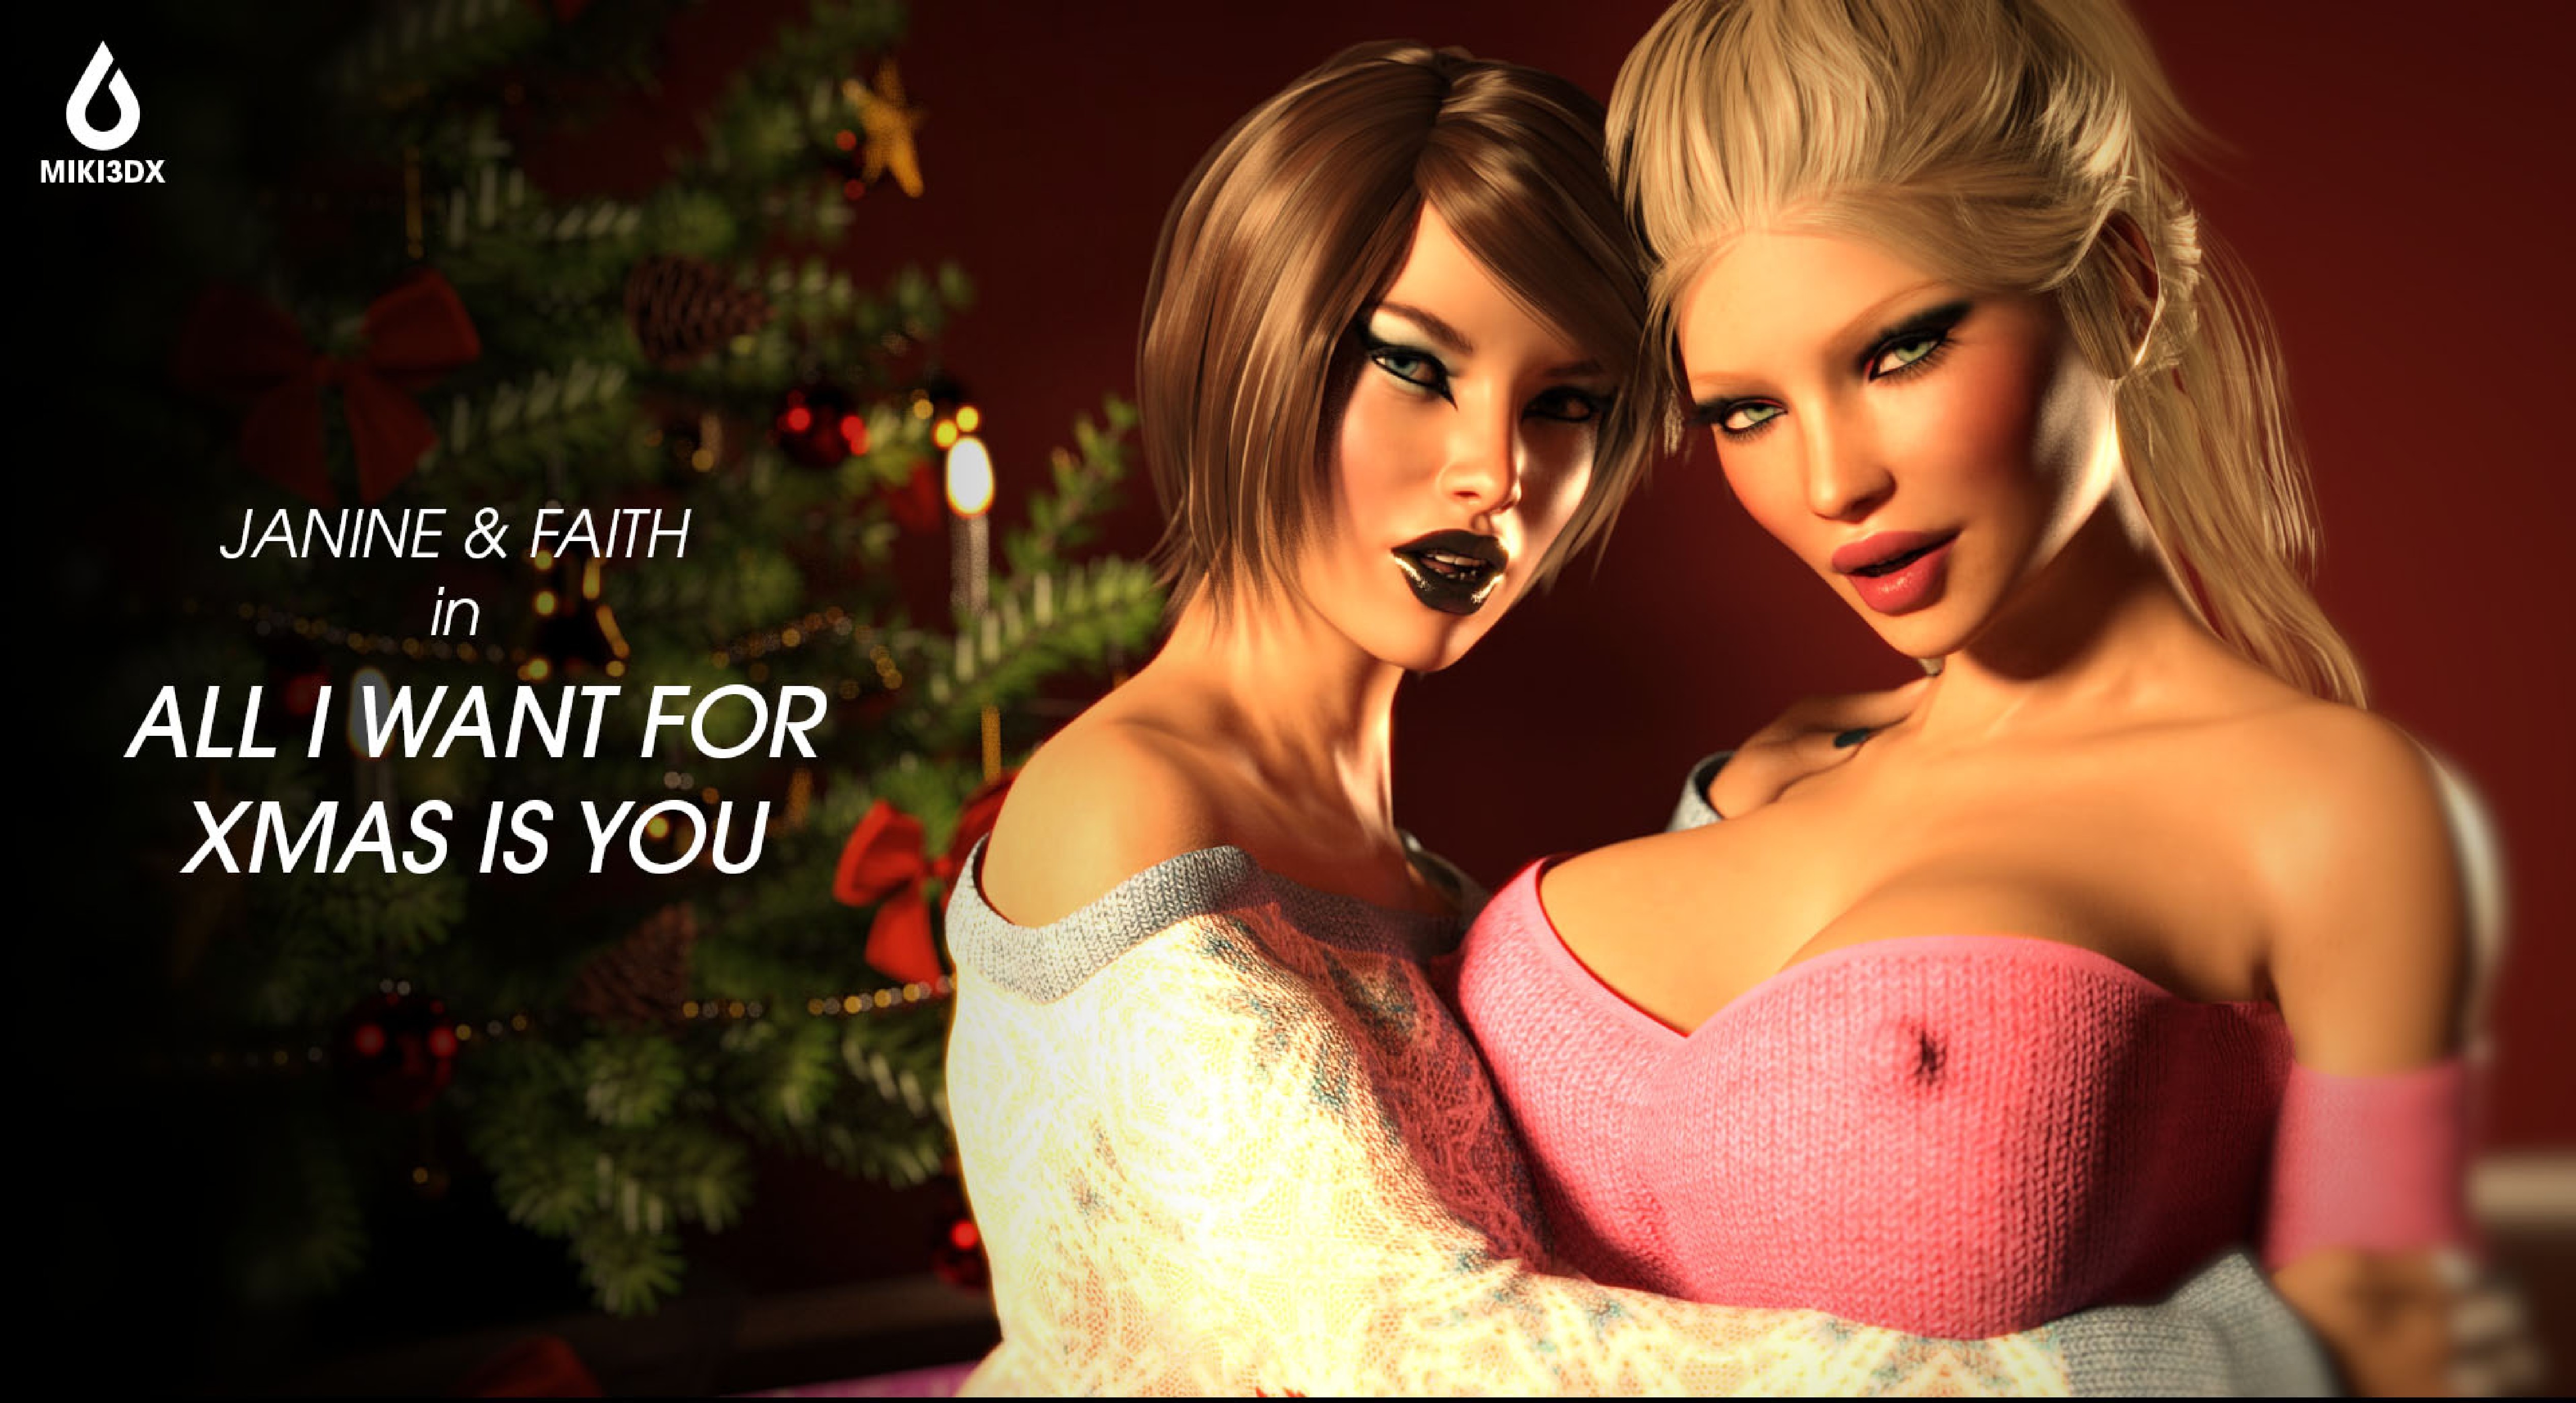 Miki3DX – All I Want For Christmas is You Complete!